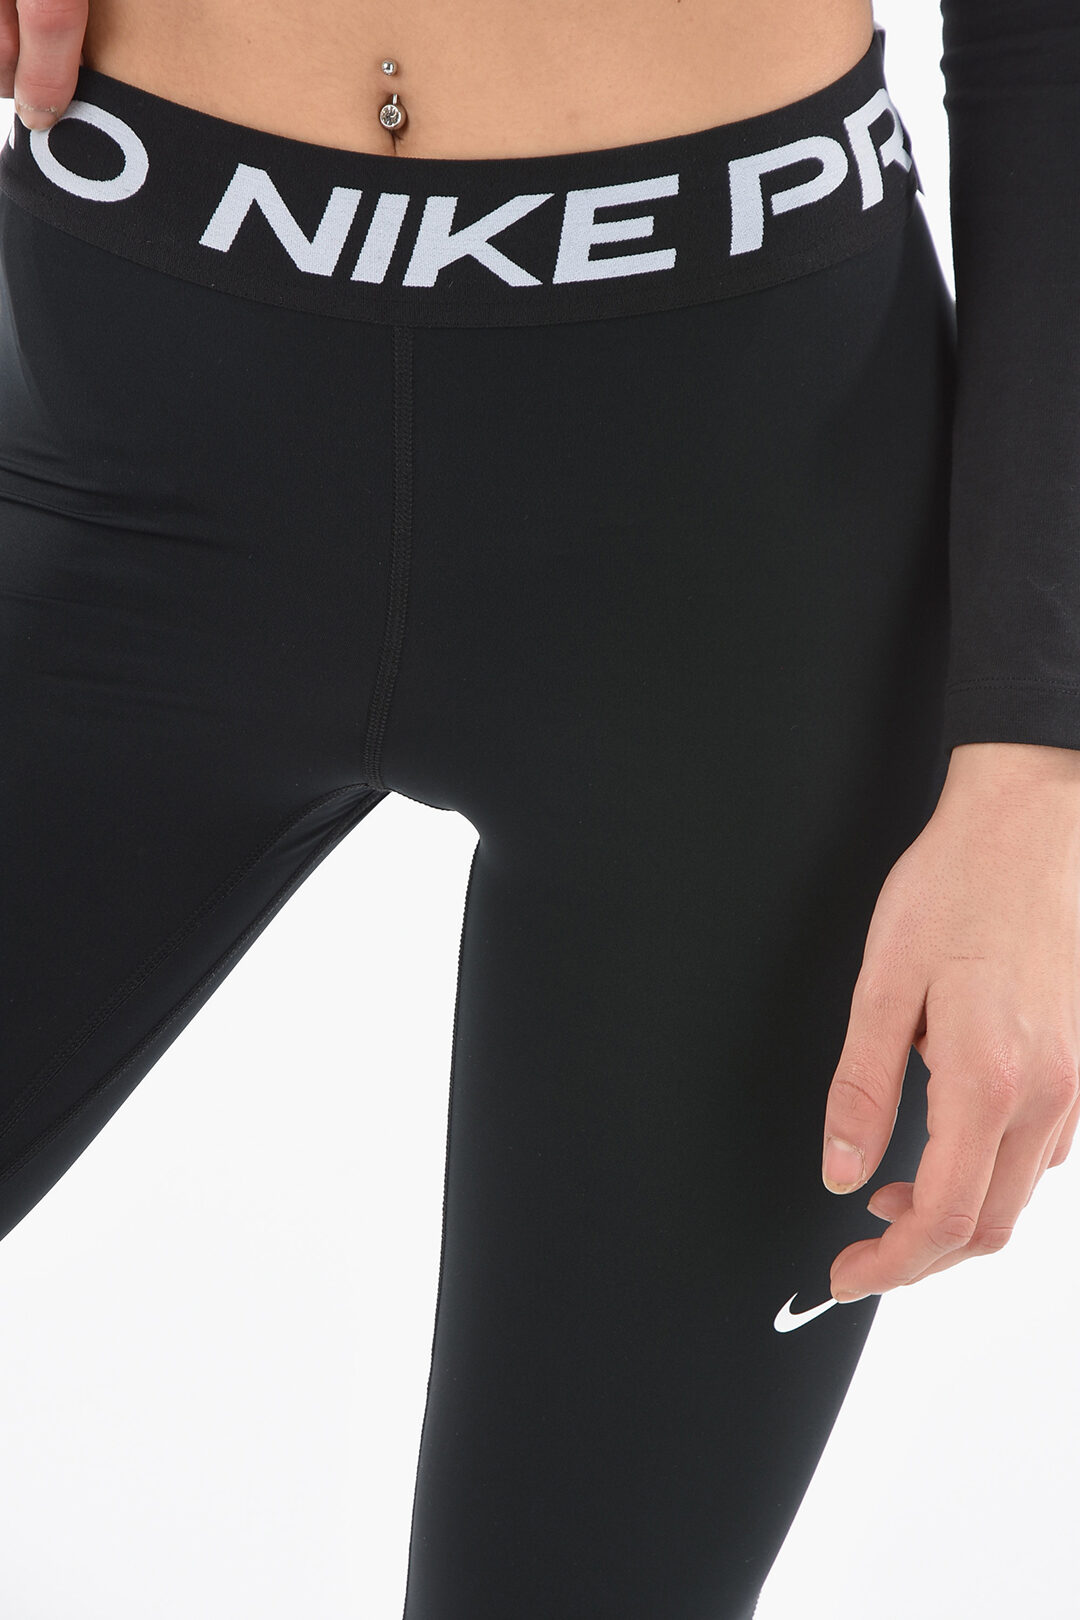 Nike PRO Logoed At the Waist DR-FIT Leggings women - Glamood Outlet